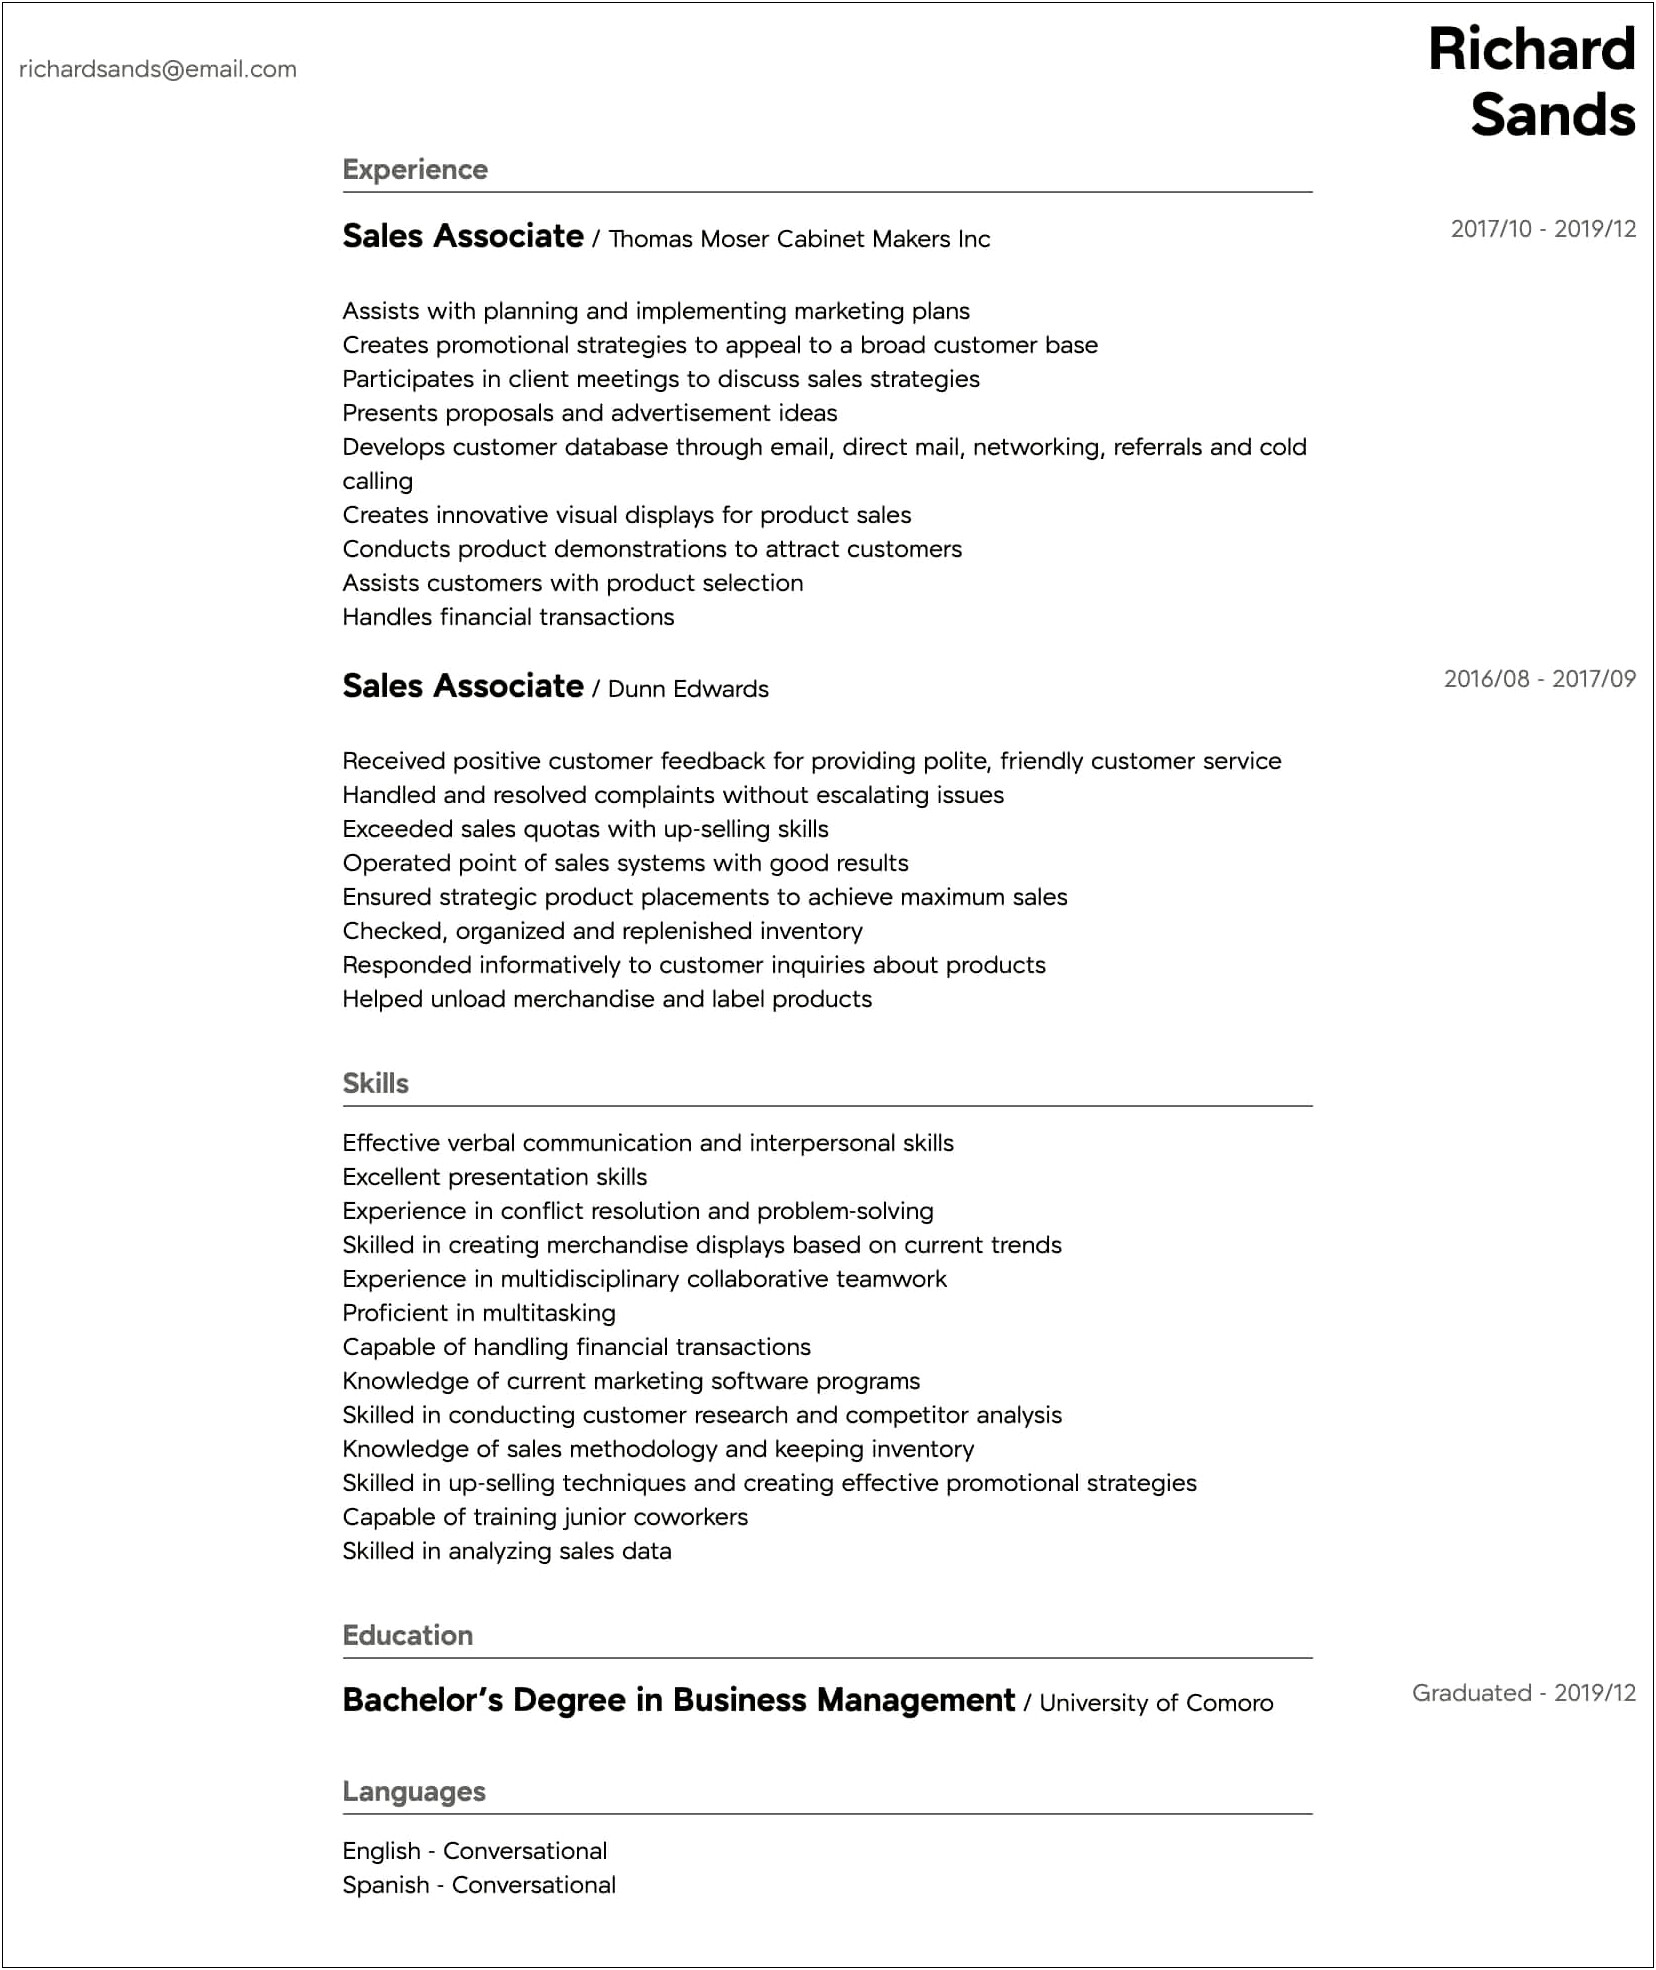 Customer Service And Sales Experience Resume